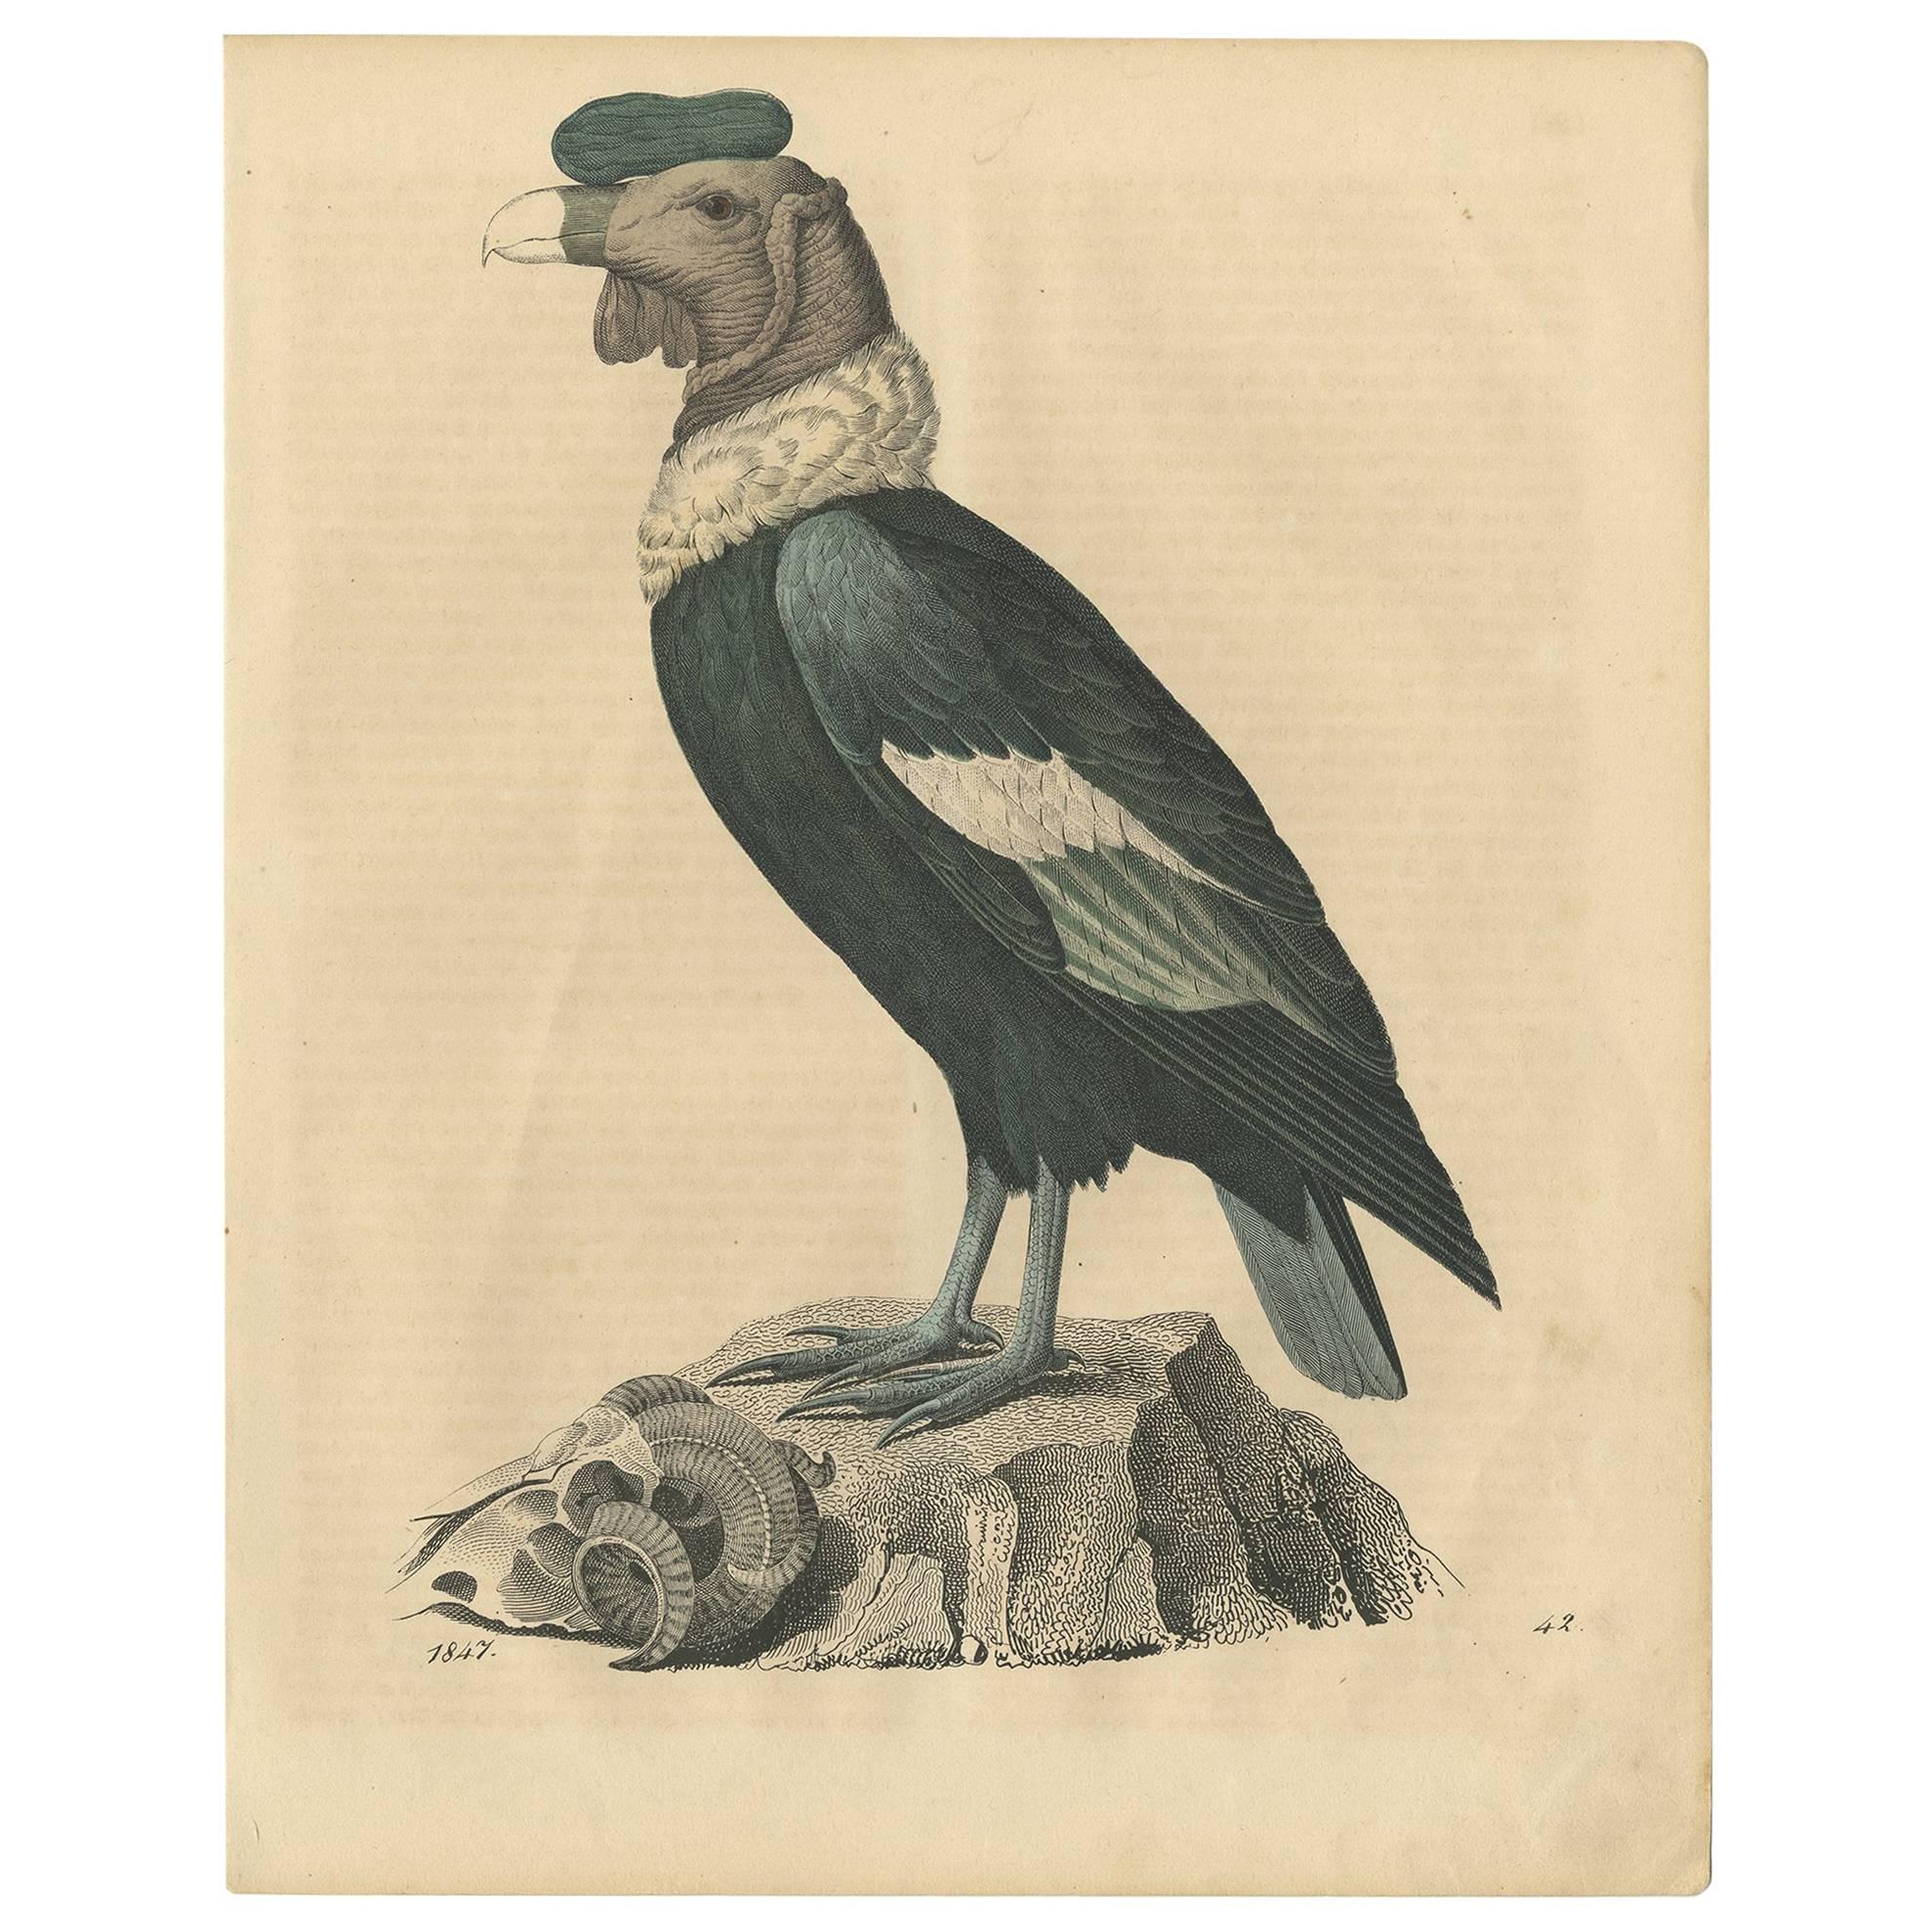 Antique Bird Print of a Condor 'Vulture' by C. Hoffmann, 1847 For Sale